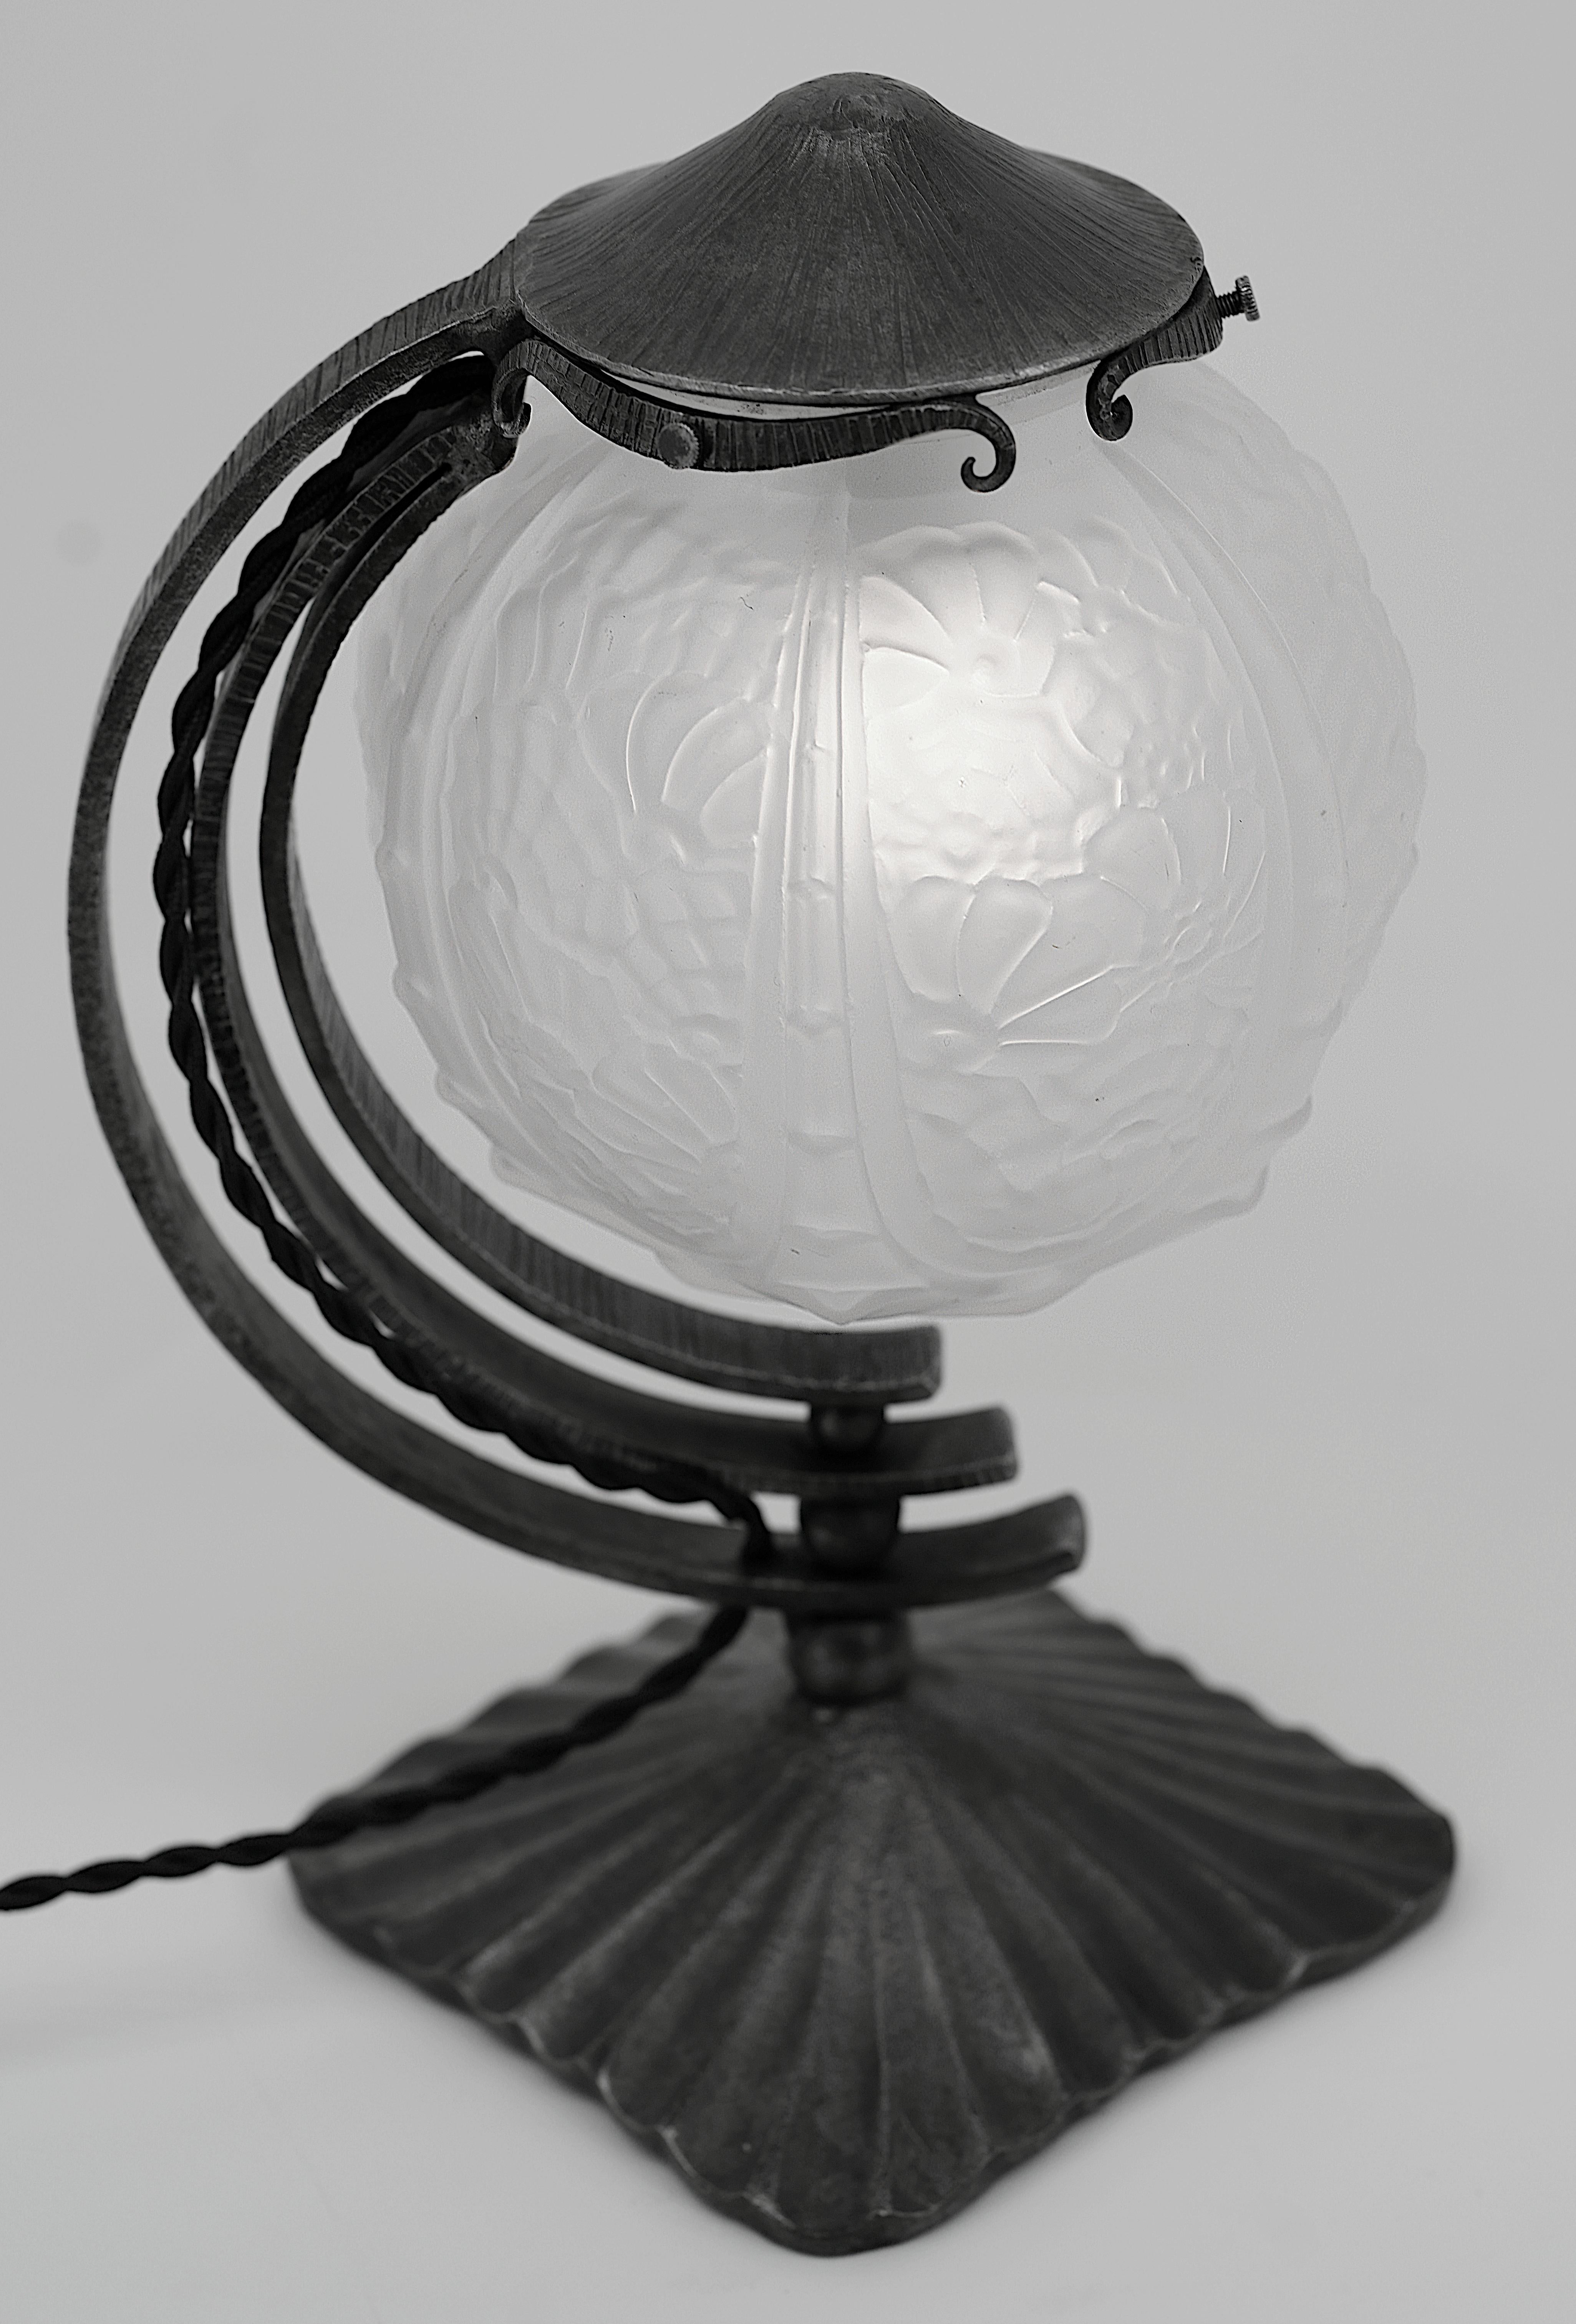 French Art Deco table lamp by CHERRIER & BESNUS, 36, rue Amelot, Paris, France, ca.1925. Glass & wrought-iron. Molded glass shade showing a stylized floral pattern hung on its stunning wrought-iron fixture. Height : 28.5cm (11.2